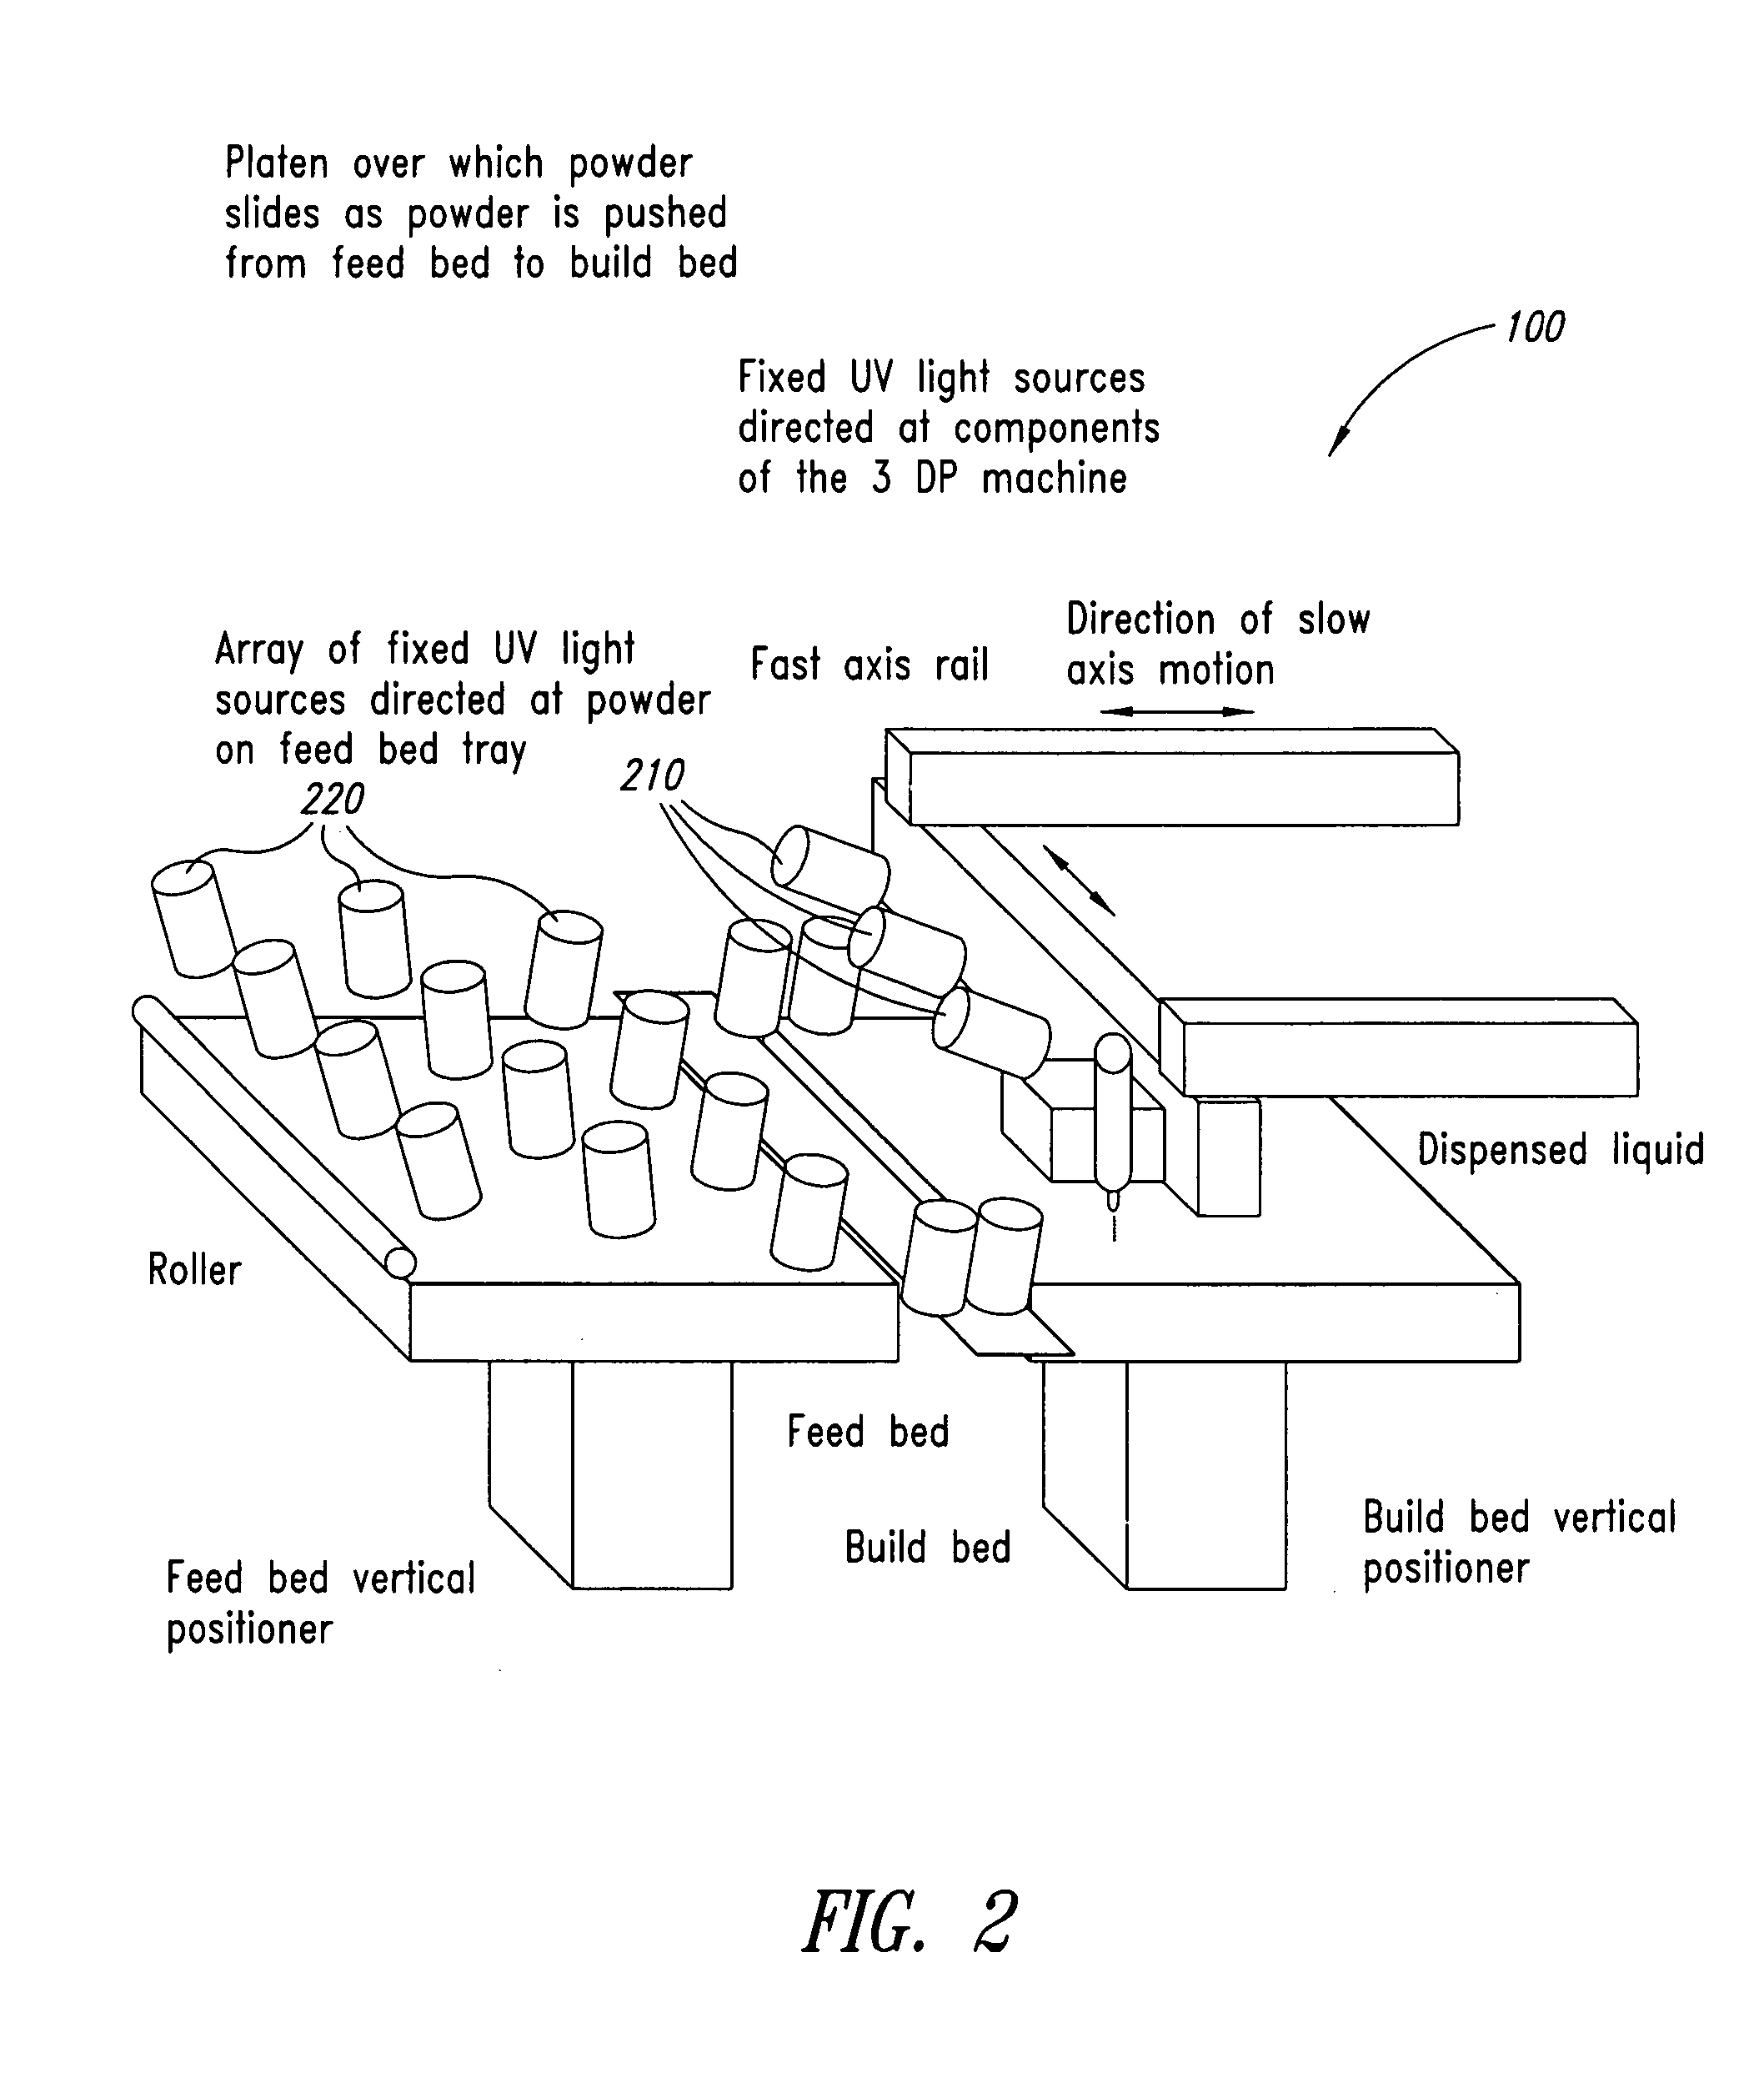 Three-dimensional printing apparatus and methods of manufacture including sterilization or disinfection, for example, using ultraviolet light